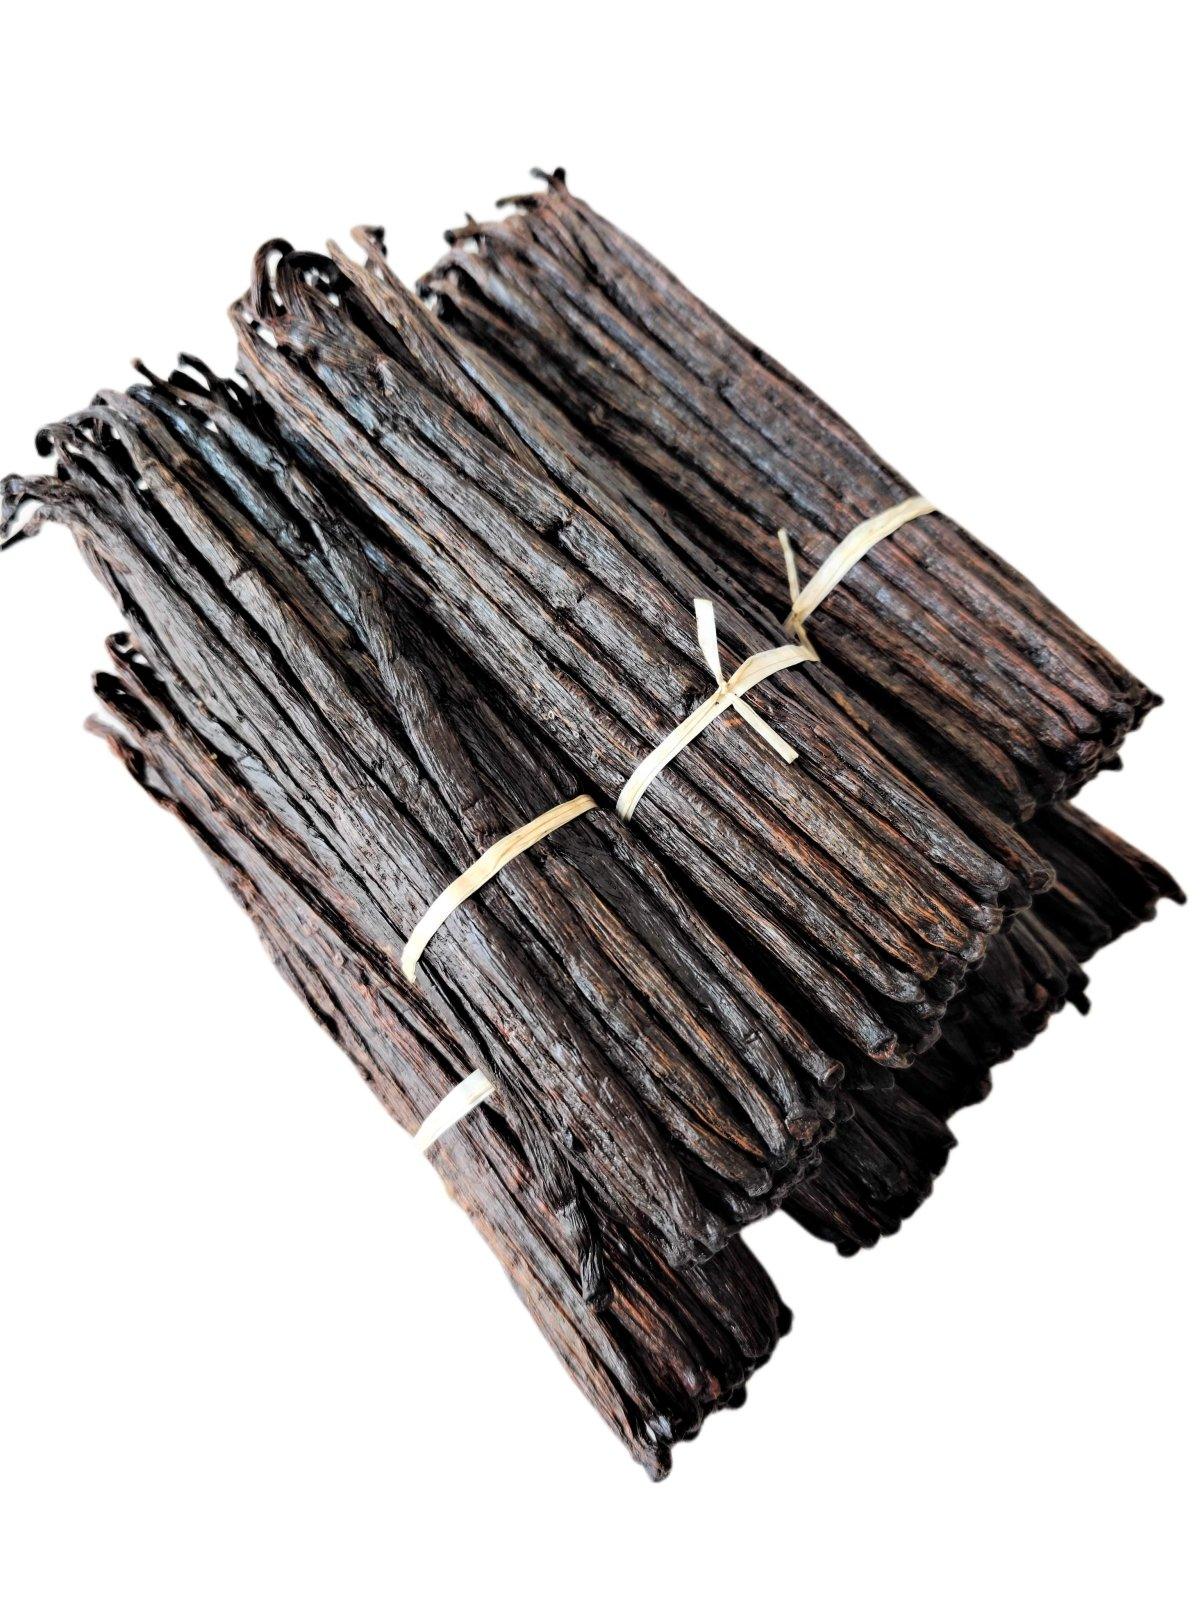 Madagascar Bourbon Extract Grade-B Vanilla Beans<br>For Extract Making<BR>1/4 lb, 1/2 lb, 1 lb, 2 lb - Spice-Land Wholesale